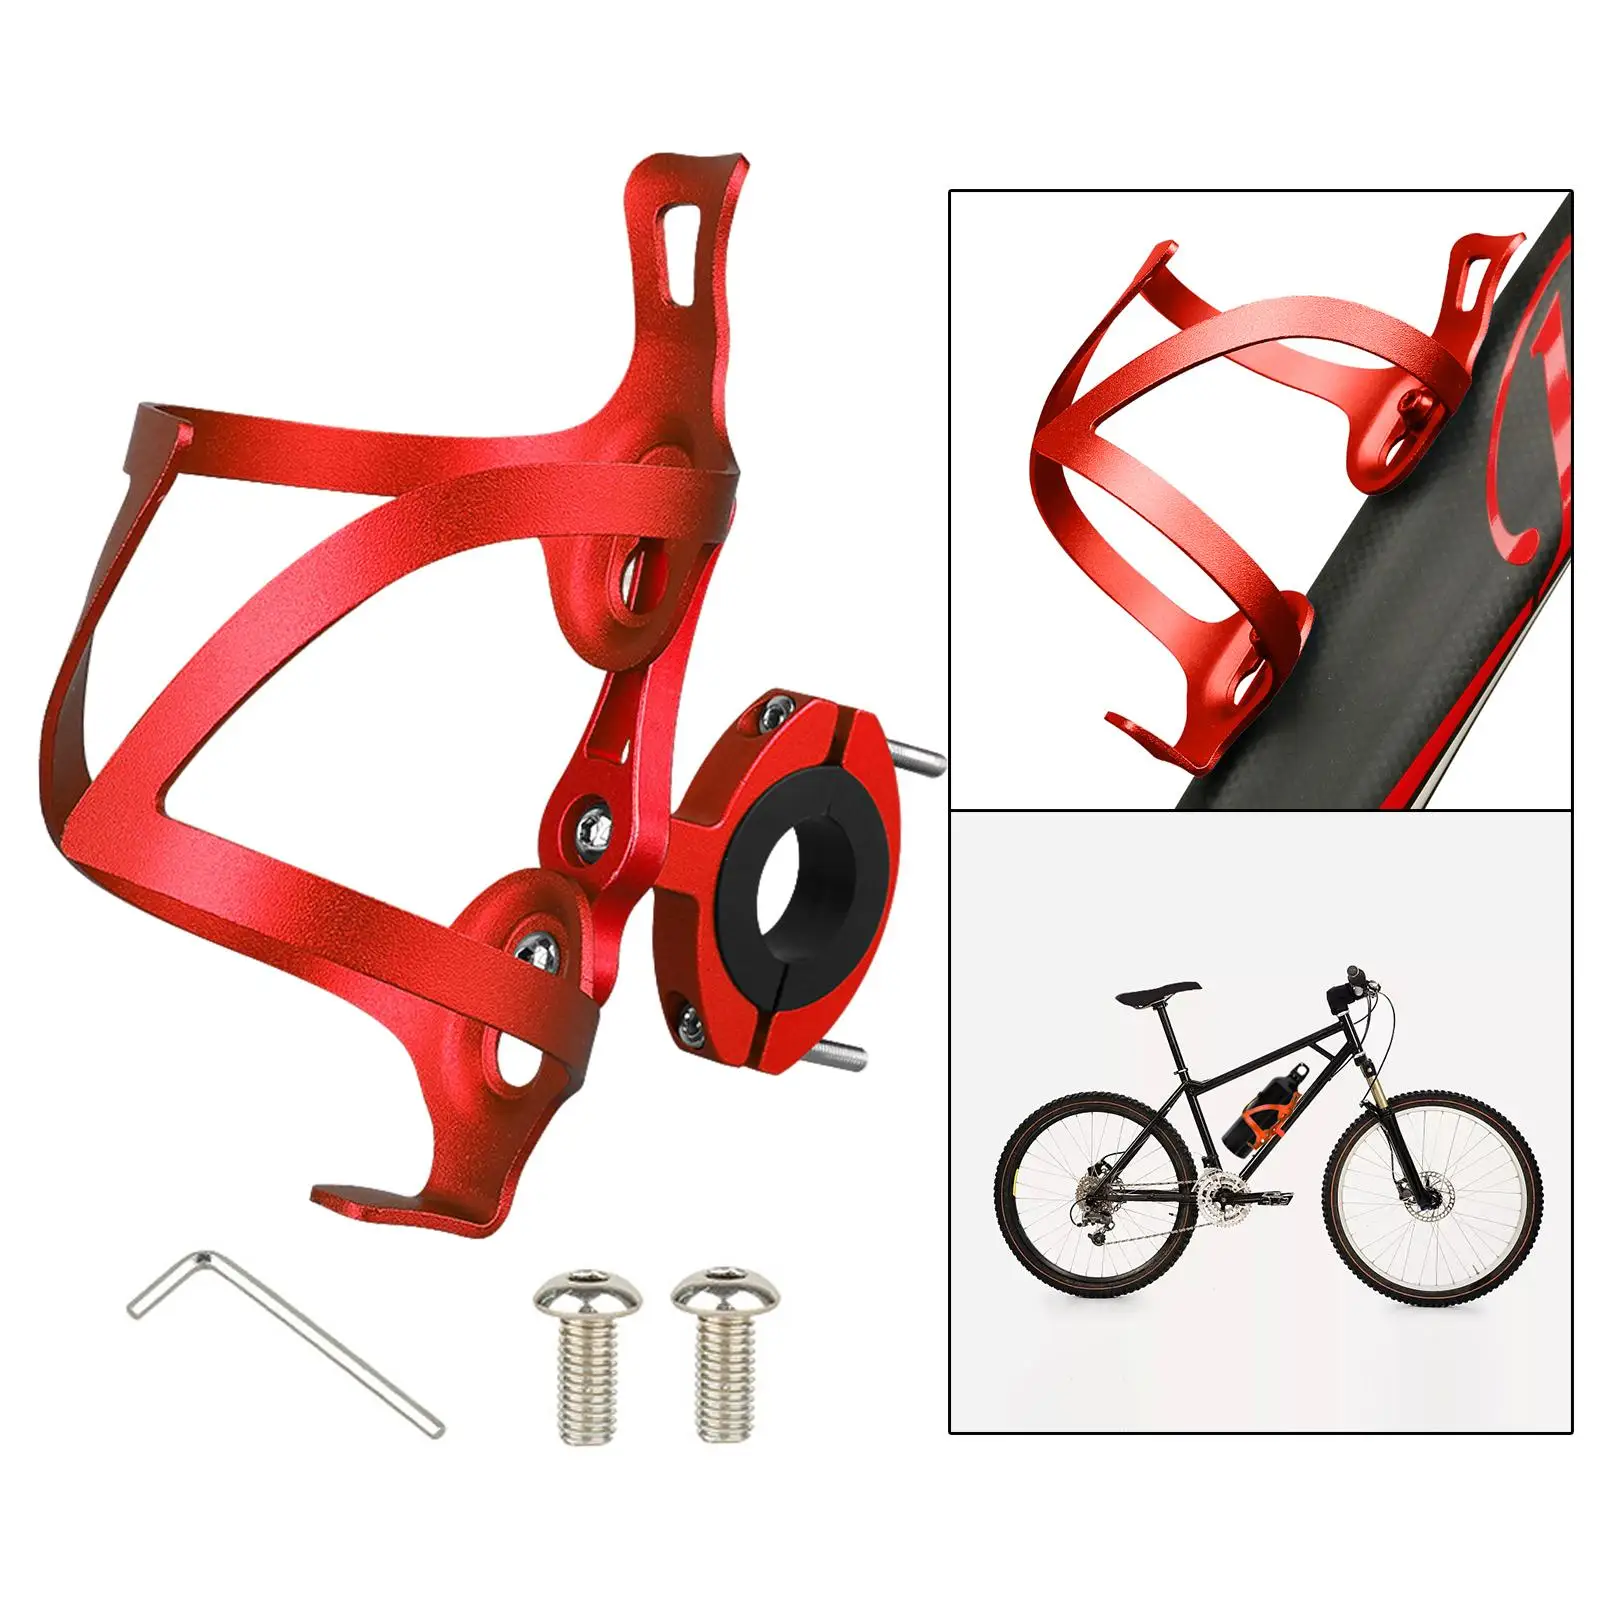 Bicycle Bottle Cage Universal Road Mountain Bike Water Cup Holder Outdoor Riding Equipment Bicycle Bottle Holder